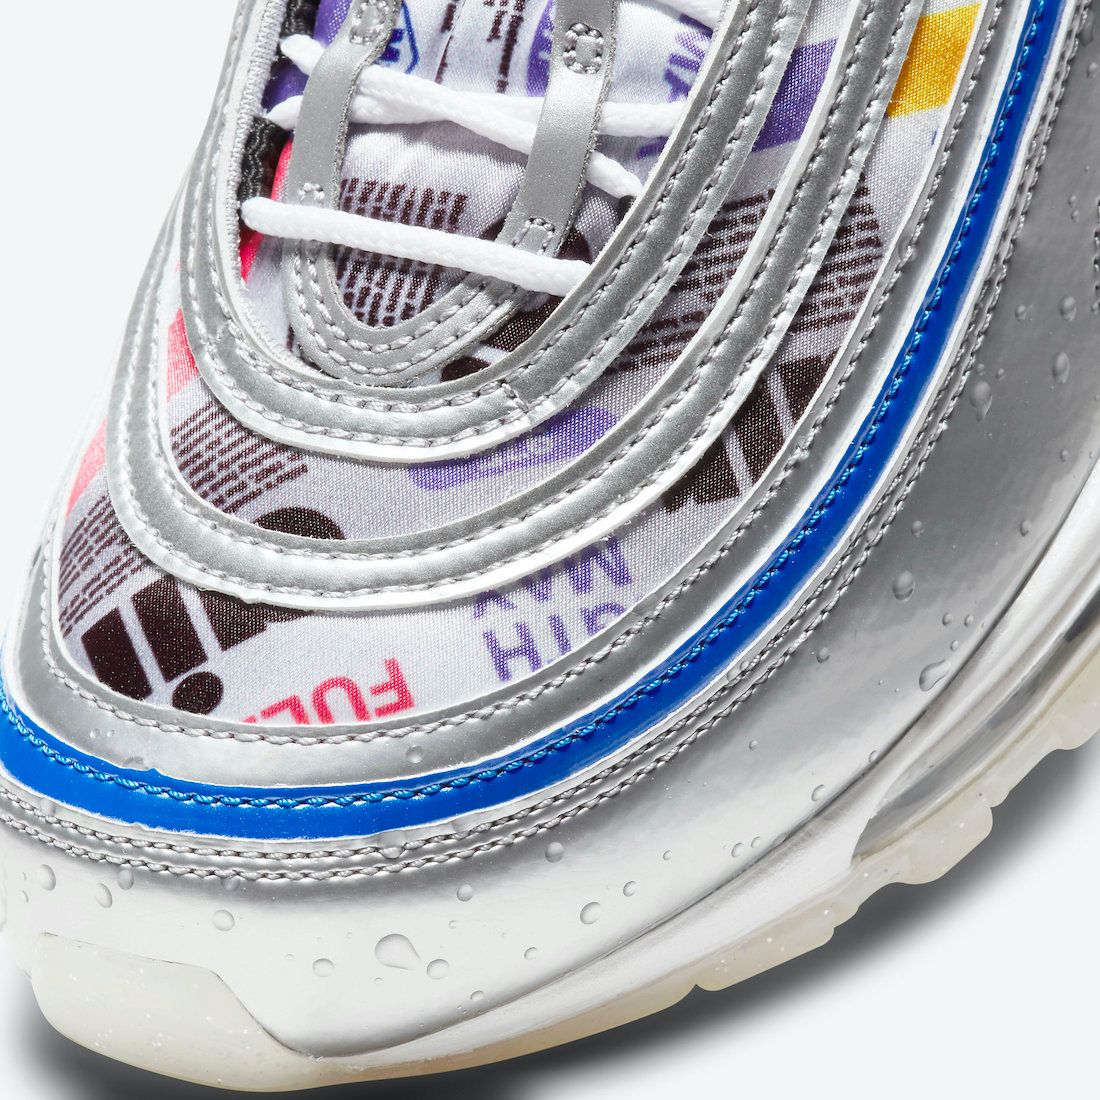 Nike Air Max 97 'Energy Jelly' official images on white